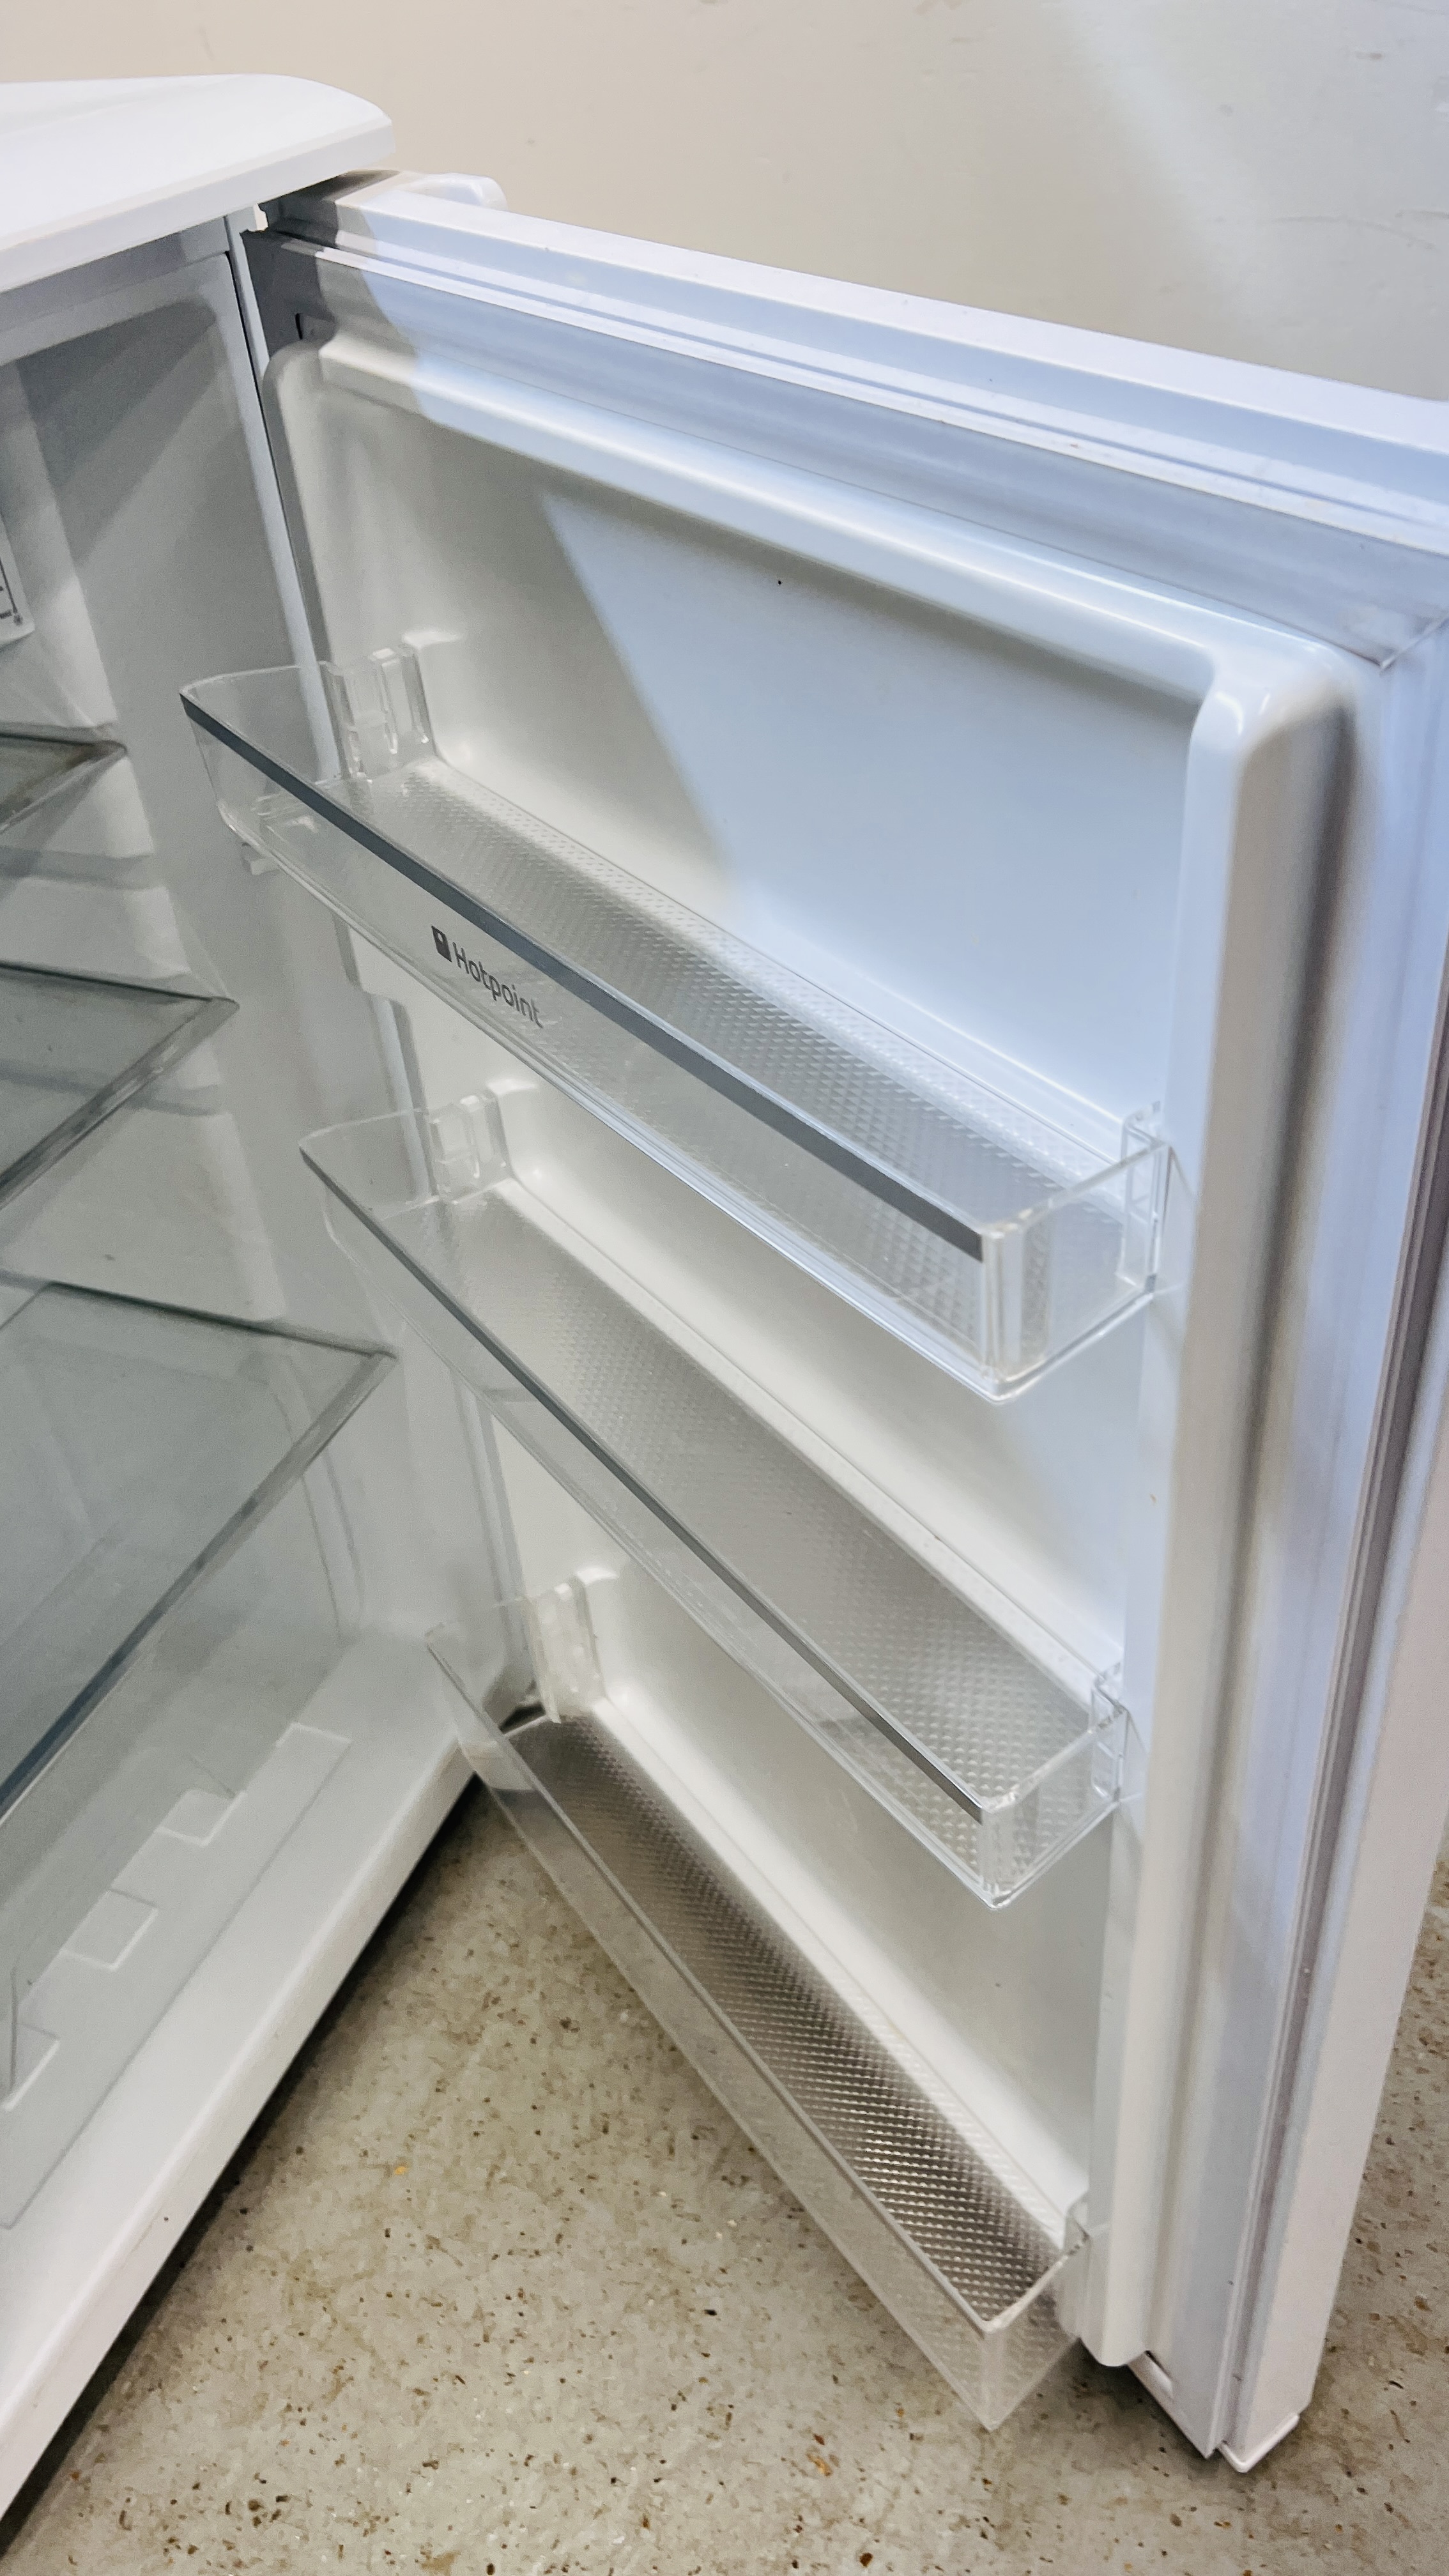 A HOTPOINT UNDER COUNTER FREEZER - SOLD AS SEEN. - Image 4 of 8